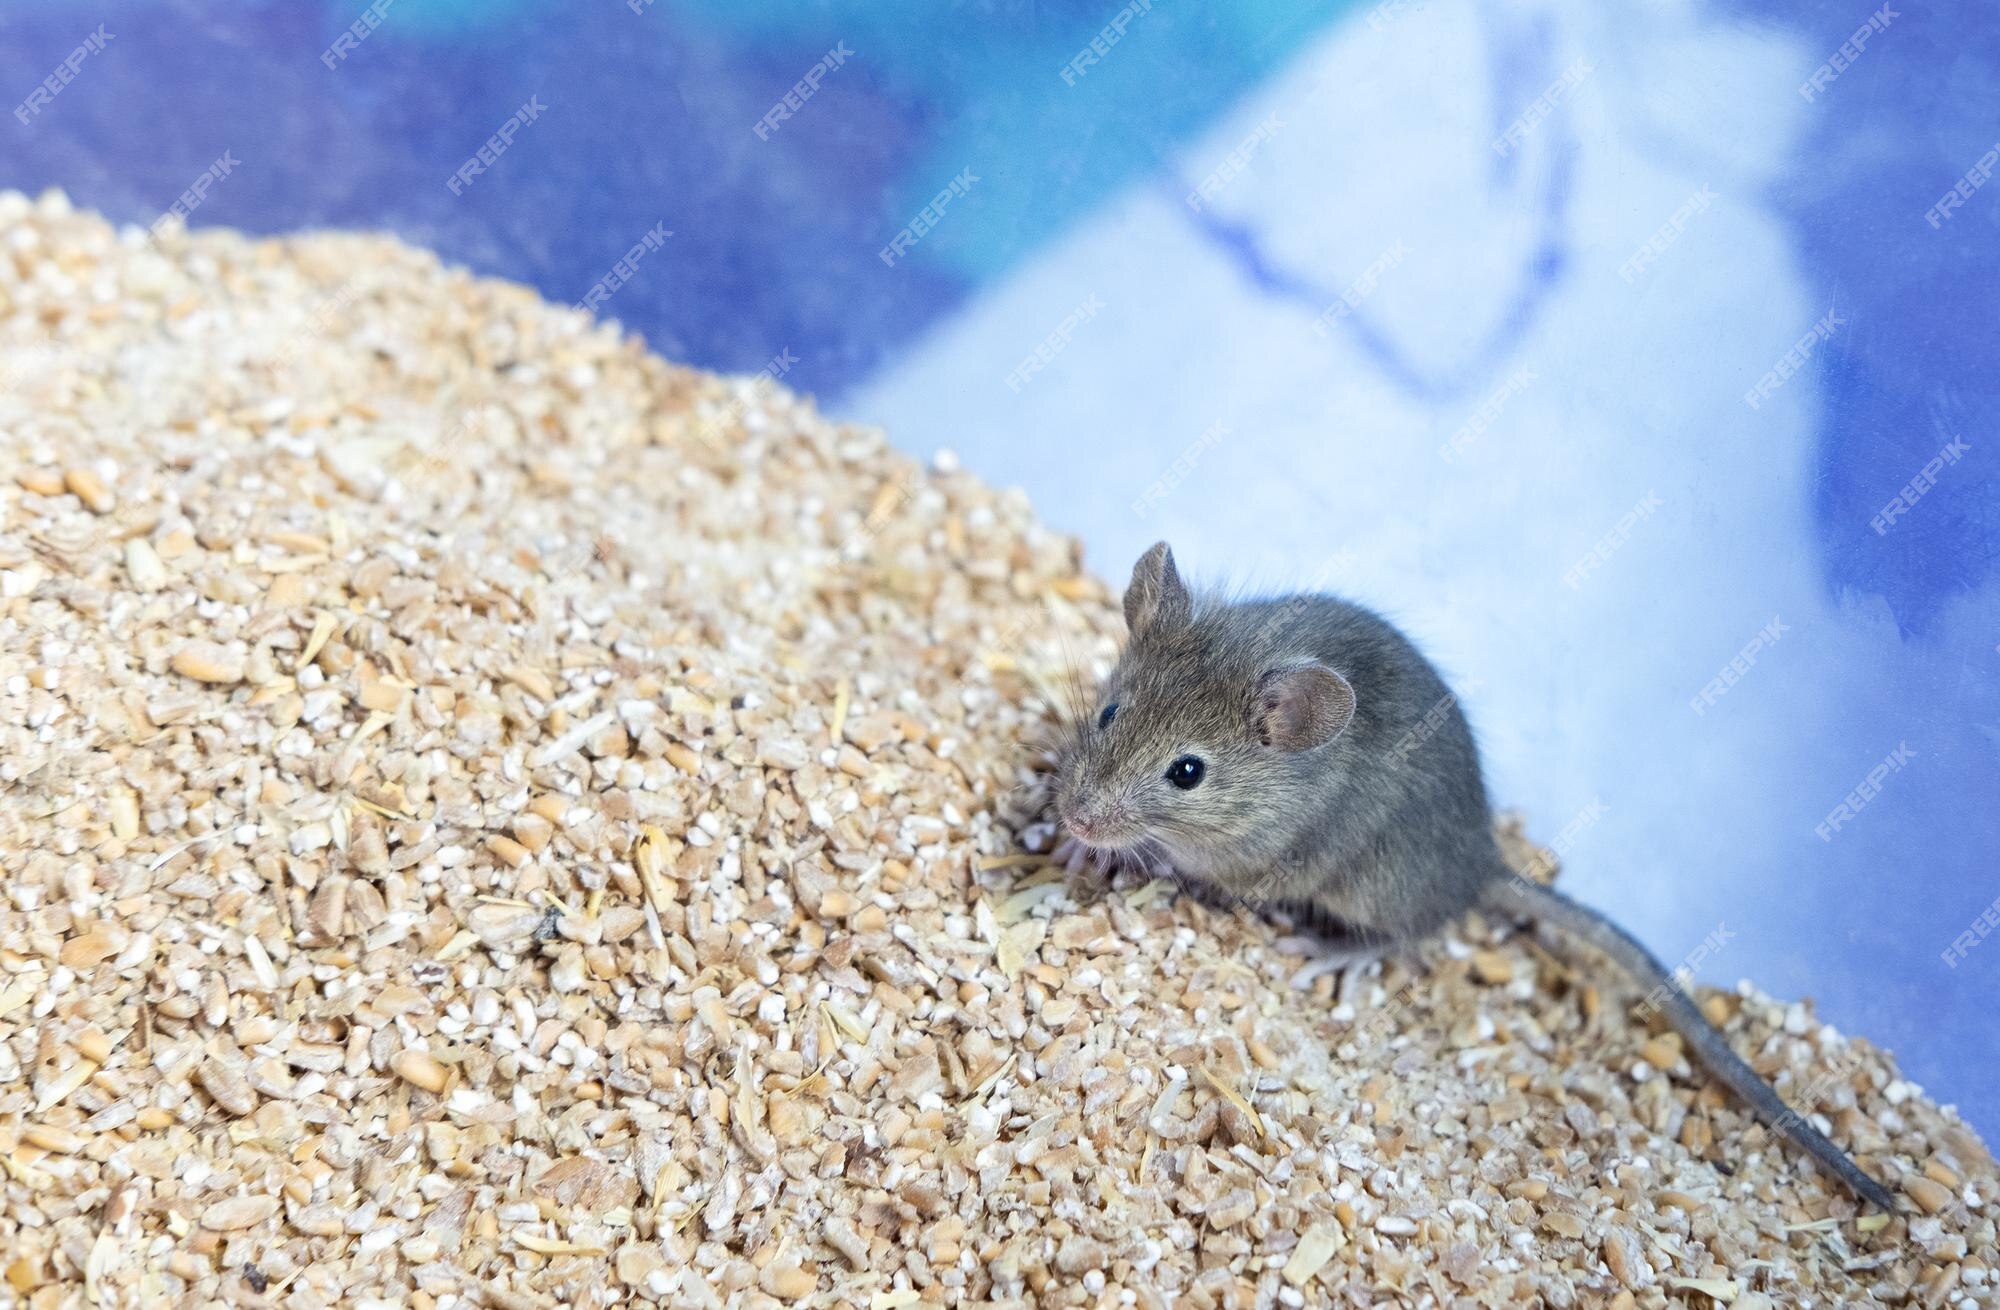 Premium Photo | A small gray mouse is sitting on a grain of wheat portrait  of a mouse rodent spoils the harvest